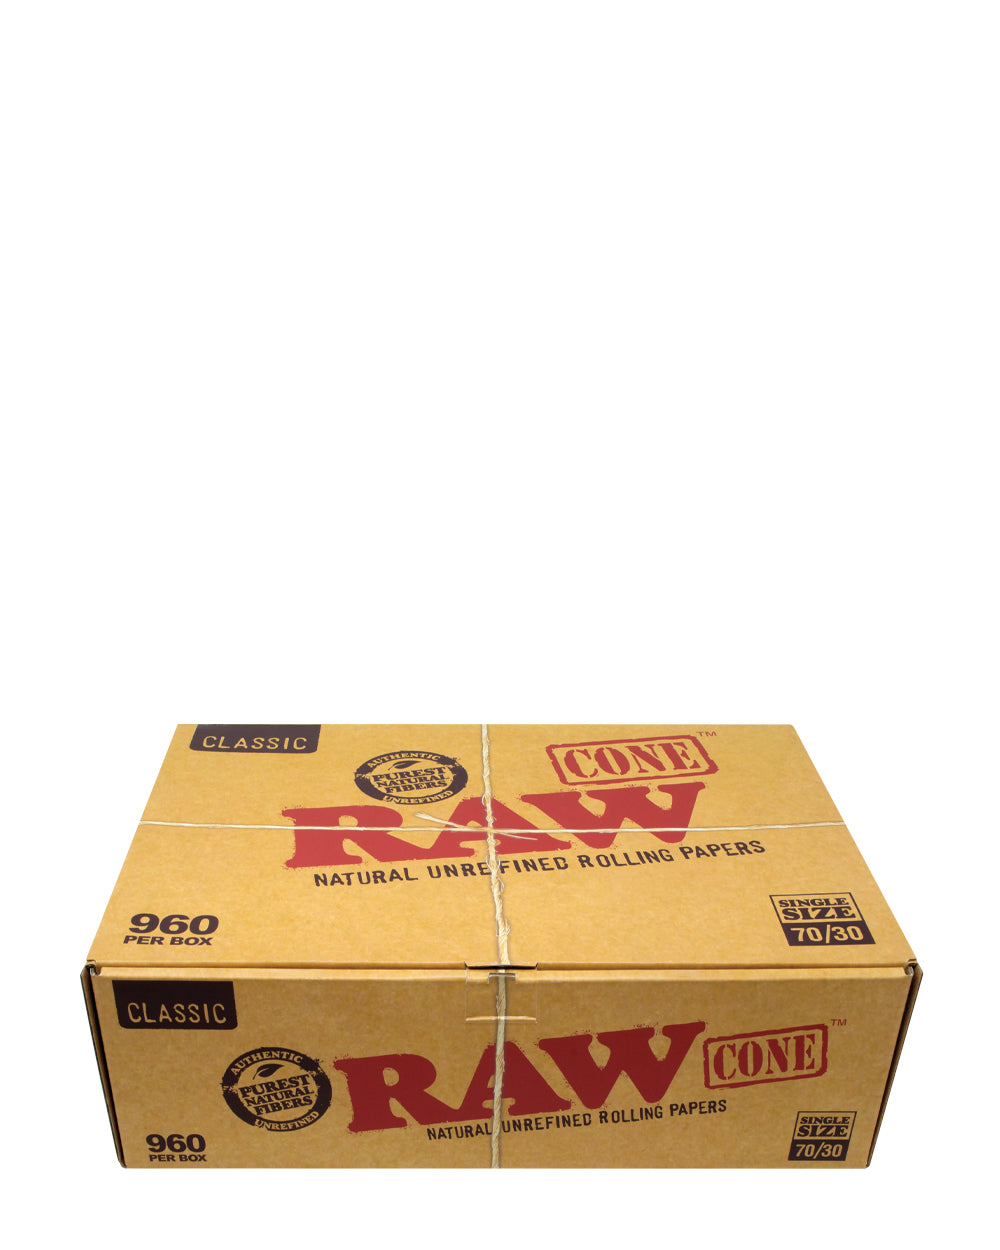 RAW | Classic Single Size Pre-Rolled Cones | 70mm - Unbleached Paper - 960 Count - 2